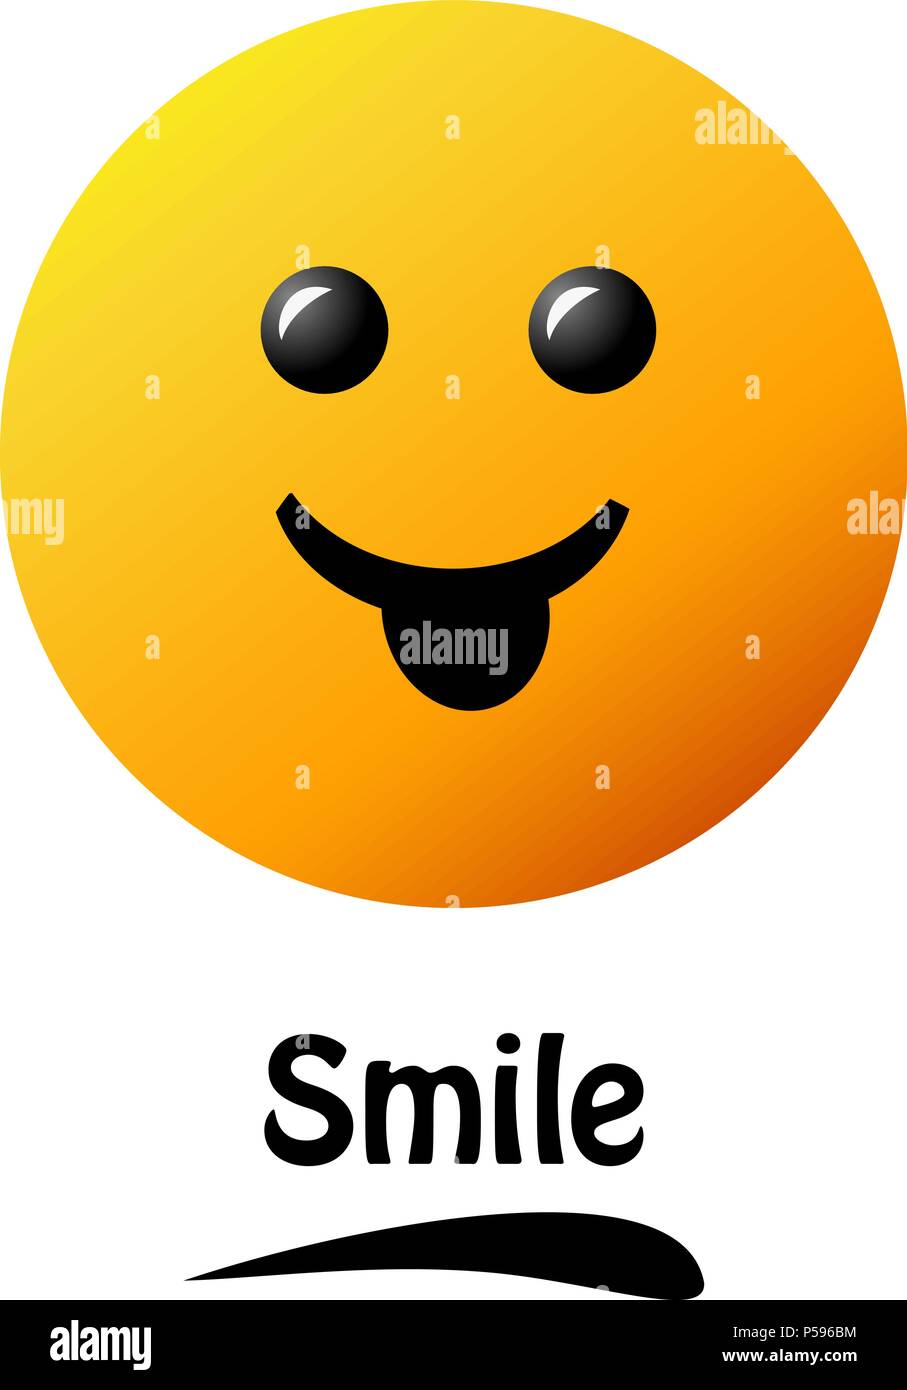 Smiley Face Poster World Smile Day Smiley Wallpaper Stock Vector Image Art Alamy